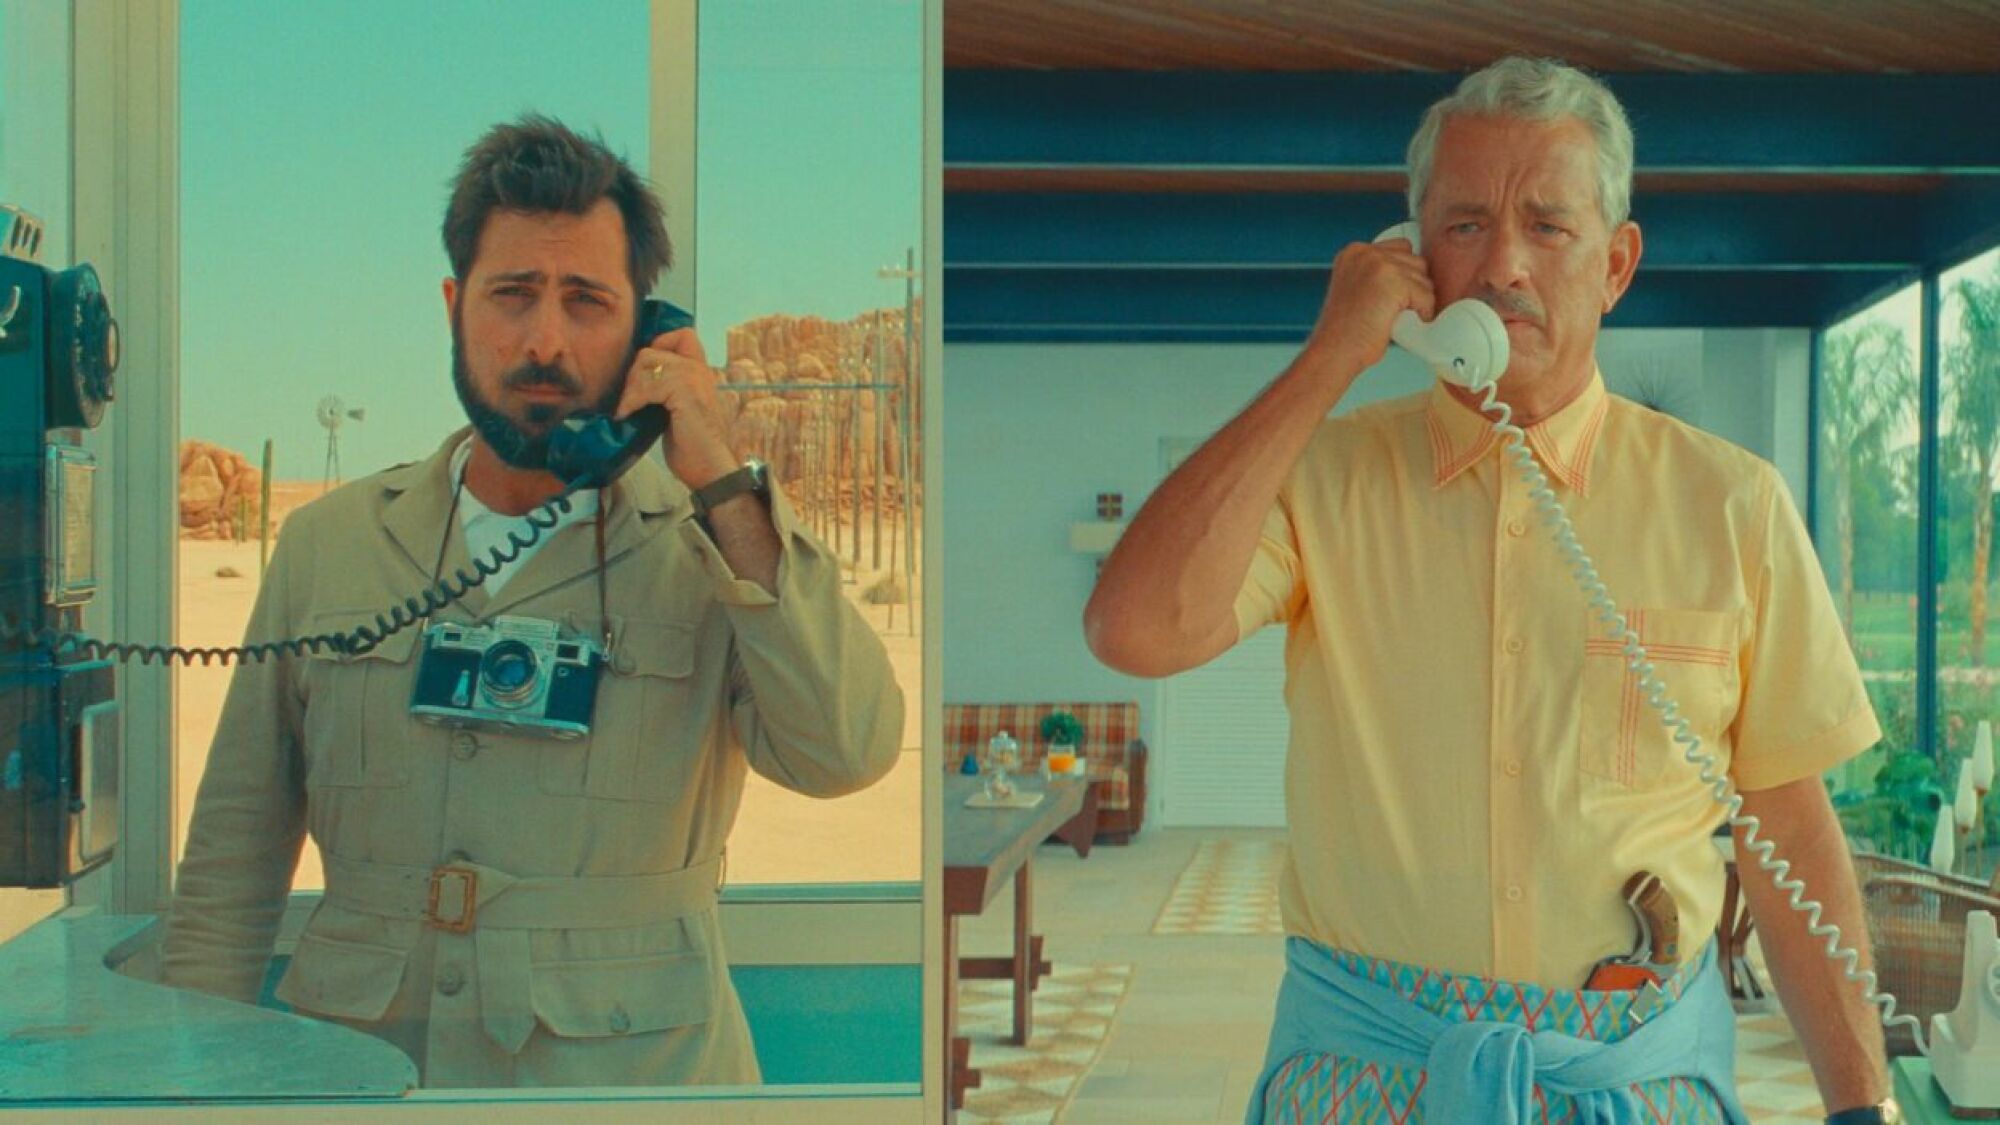 A side by side image of two men speaking on the phone. 